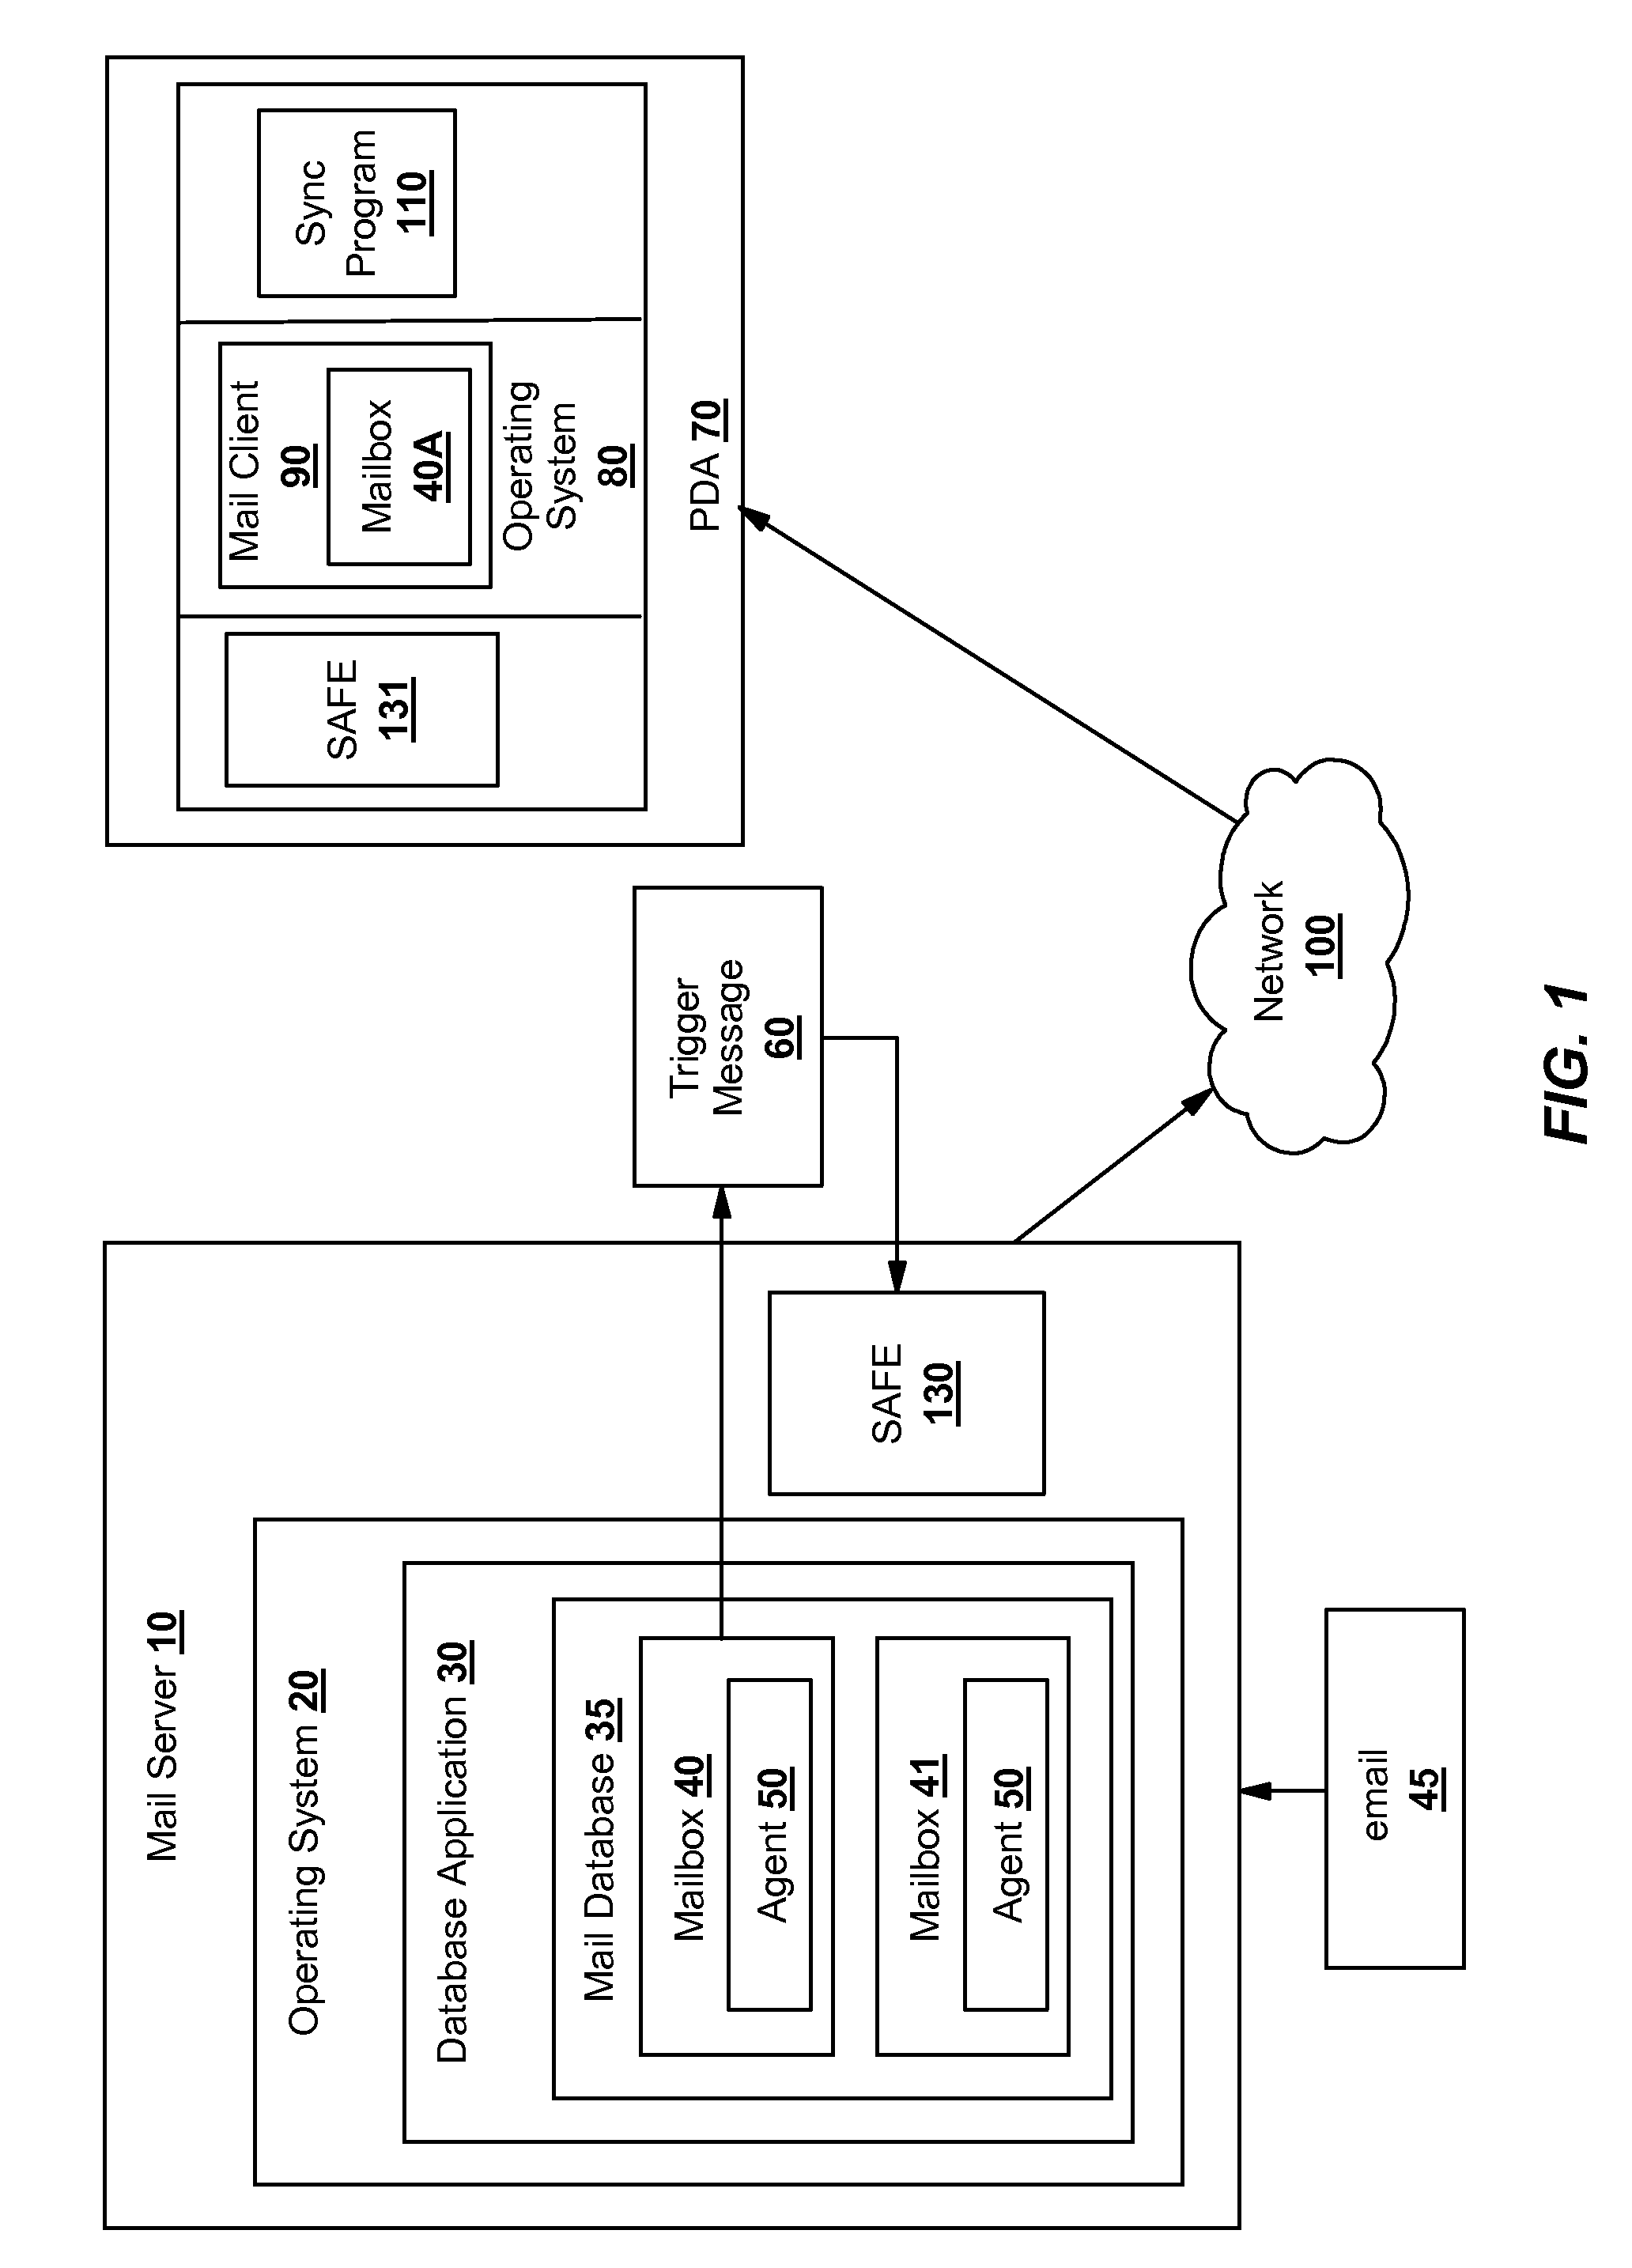 Database synchronization for mobile computing devices